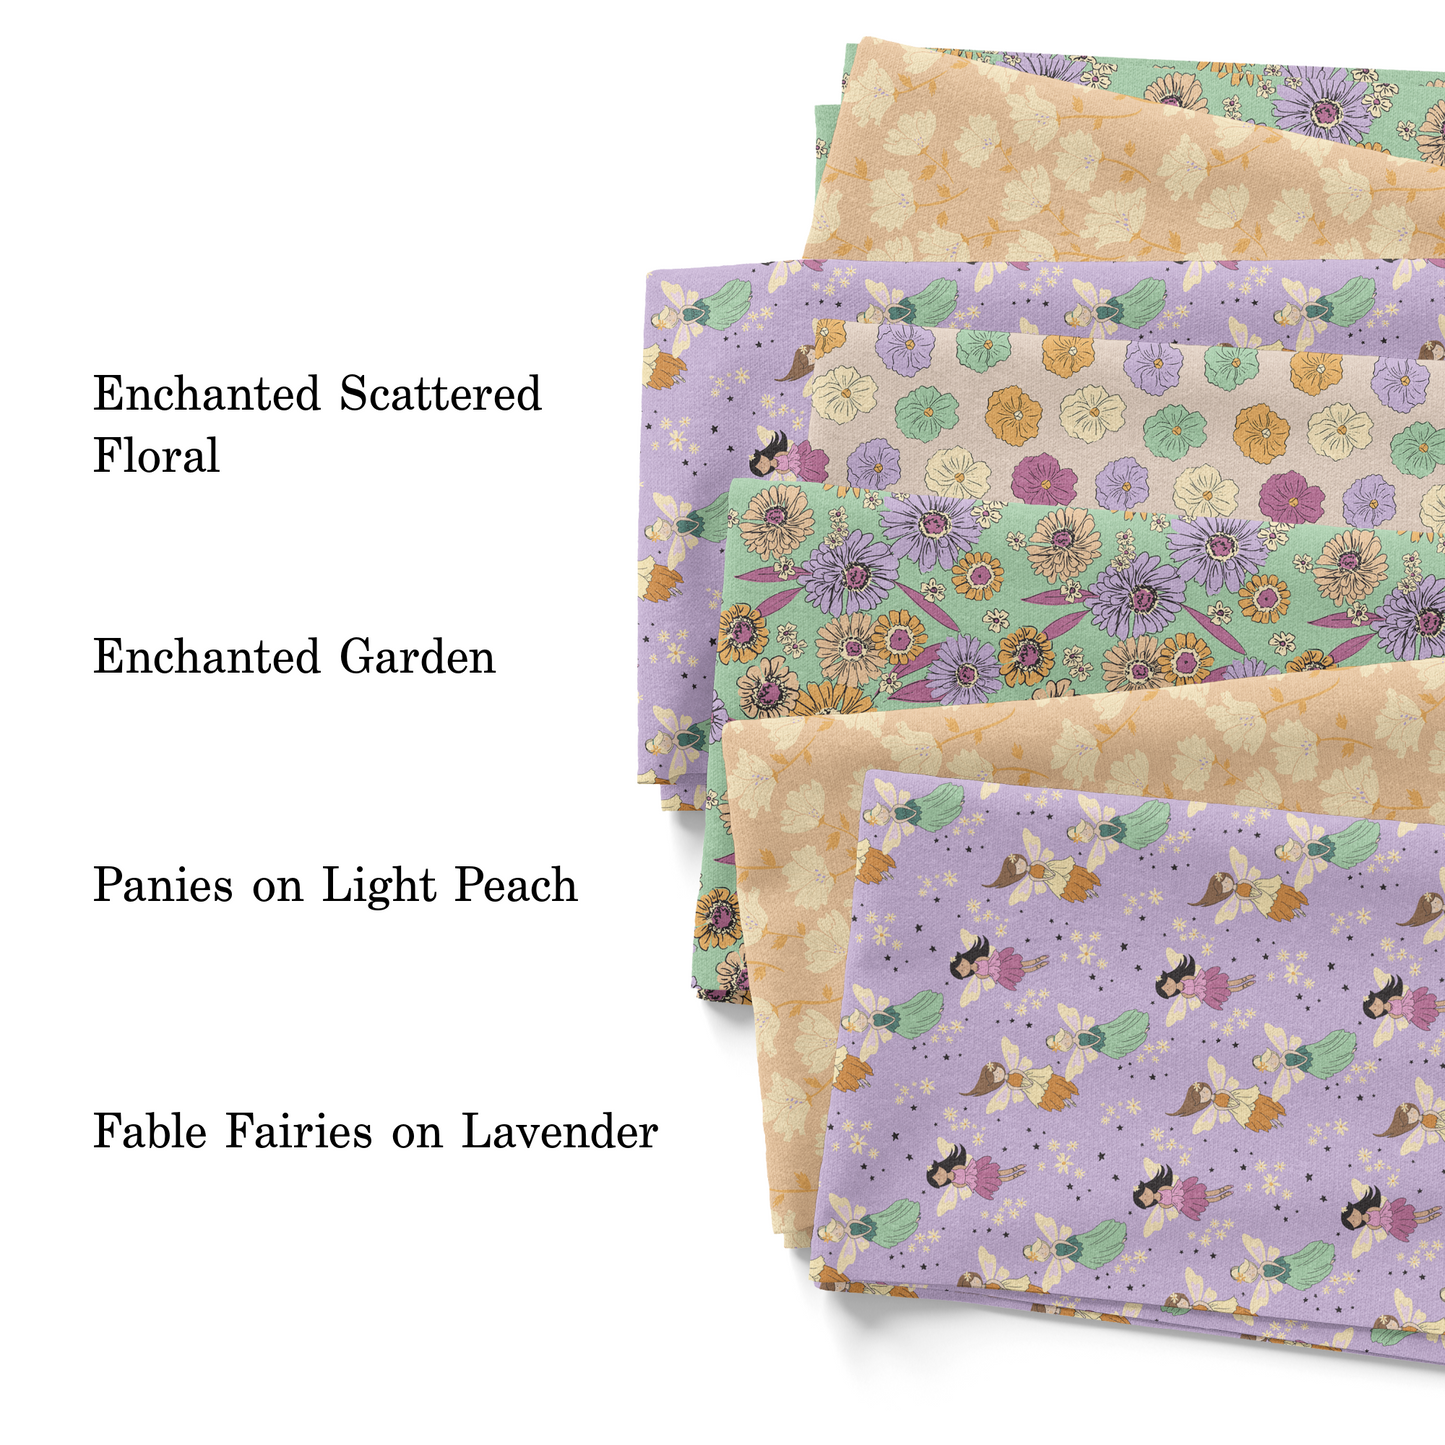 Enchanted Scattered Floral Fabric By The Yard